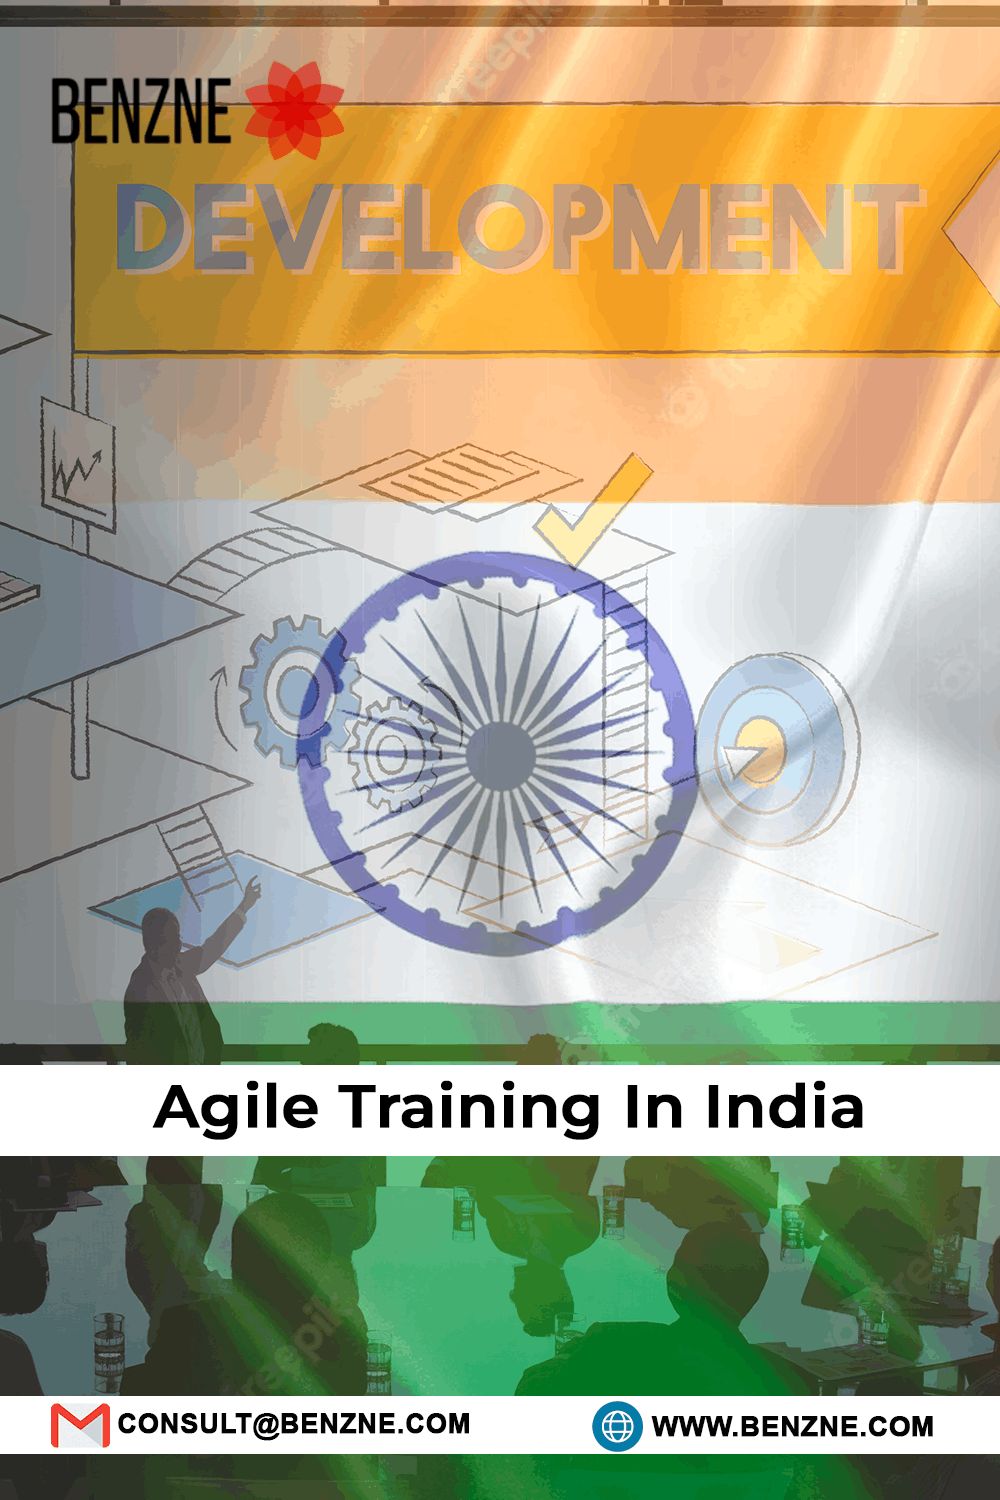 Agile Training In India With Benzne- An Approach To Help An Organization Success